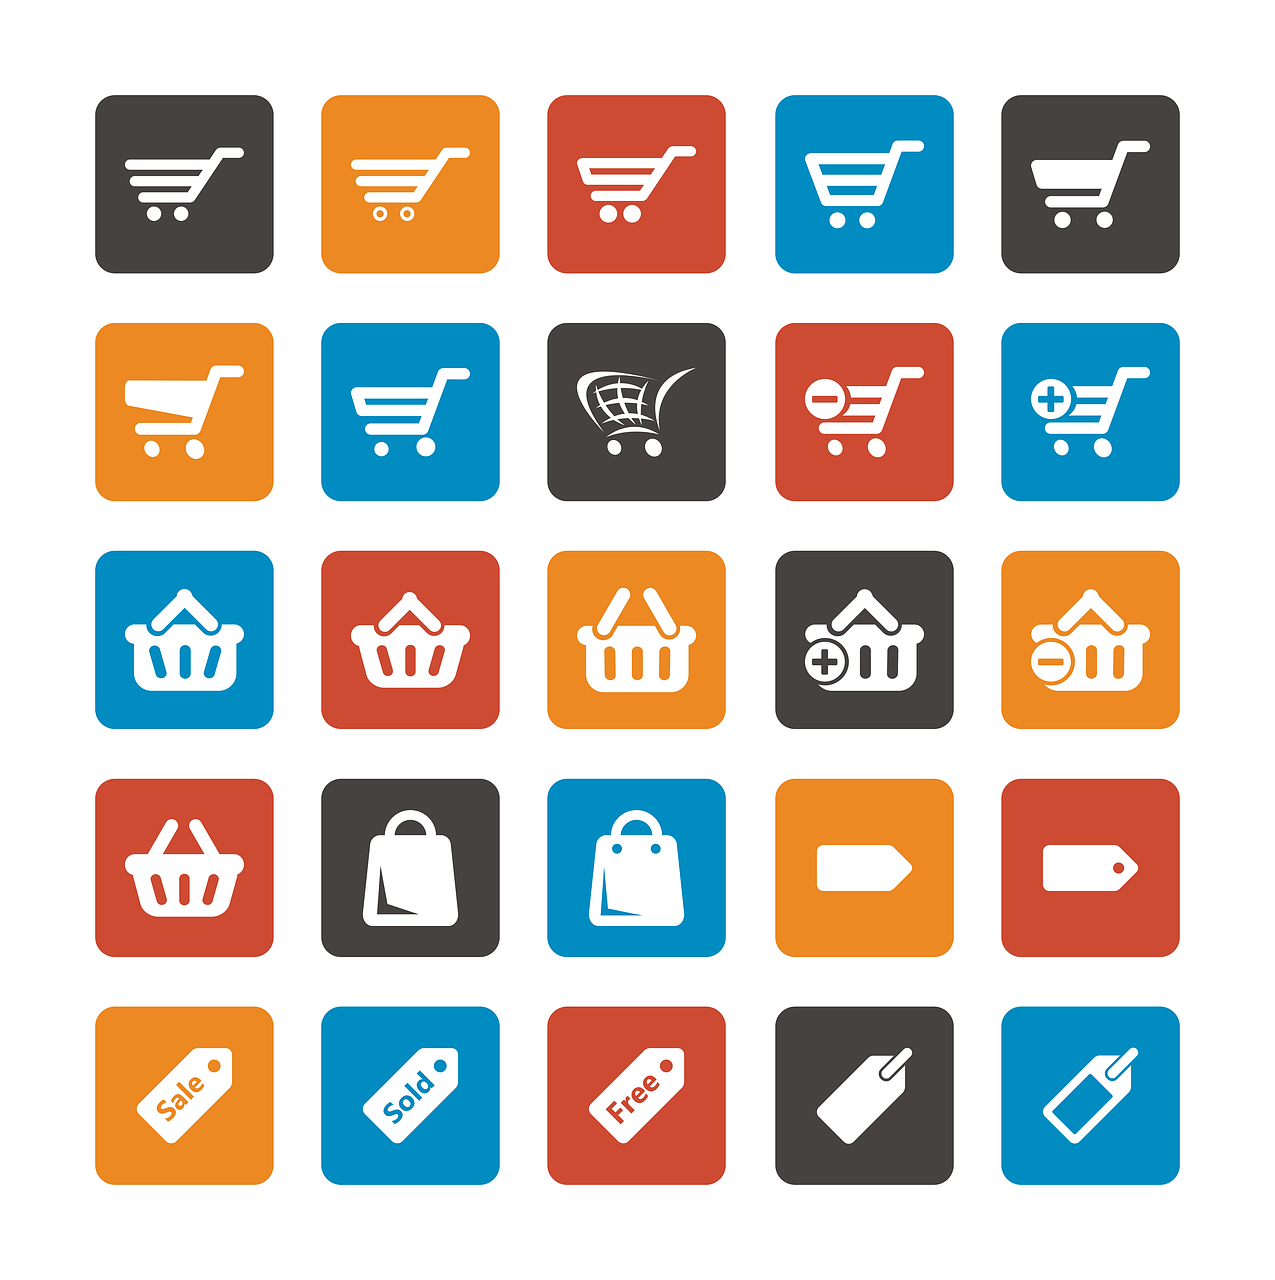 Various icons suggesting “shopping cart” and “add to cart” buttons.